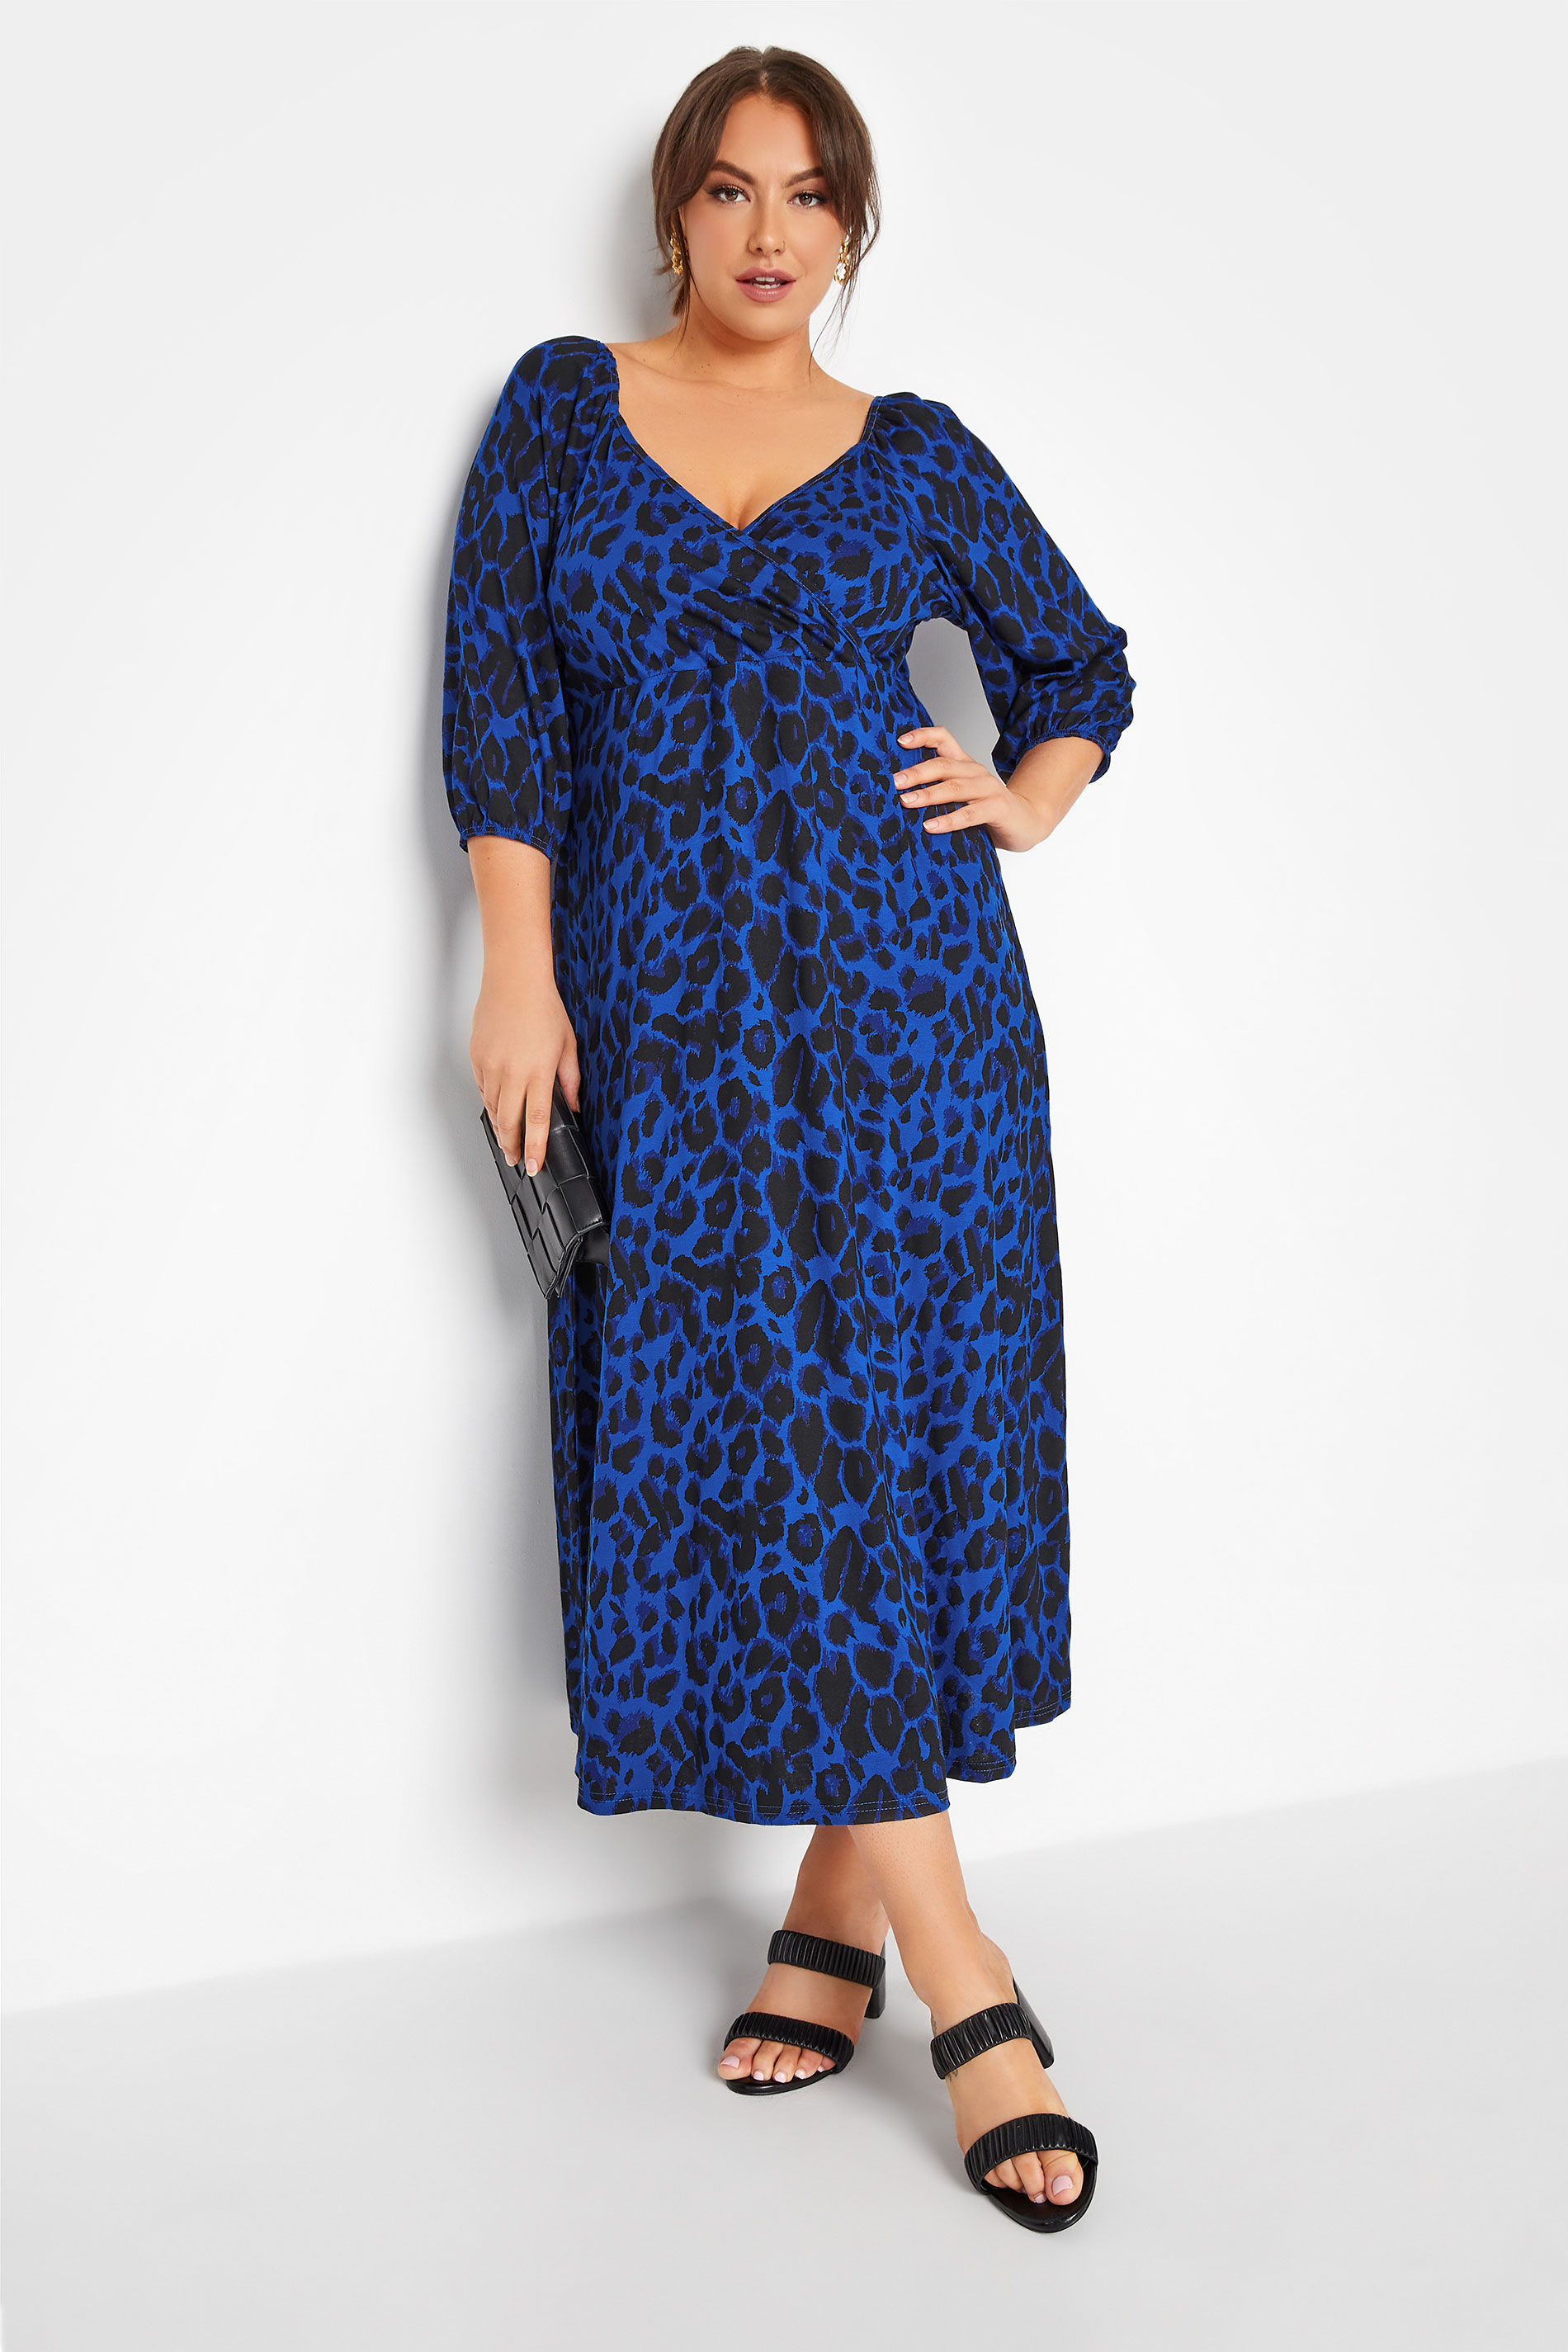 Robes Grande Taille Grande taille  Robes Portefeuilles | LIMITED COLLECTION - Robe Bleue Roi Léopard Milkmaid - AH05404